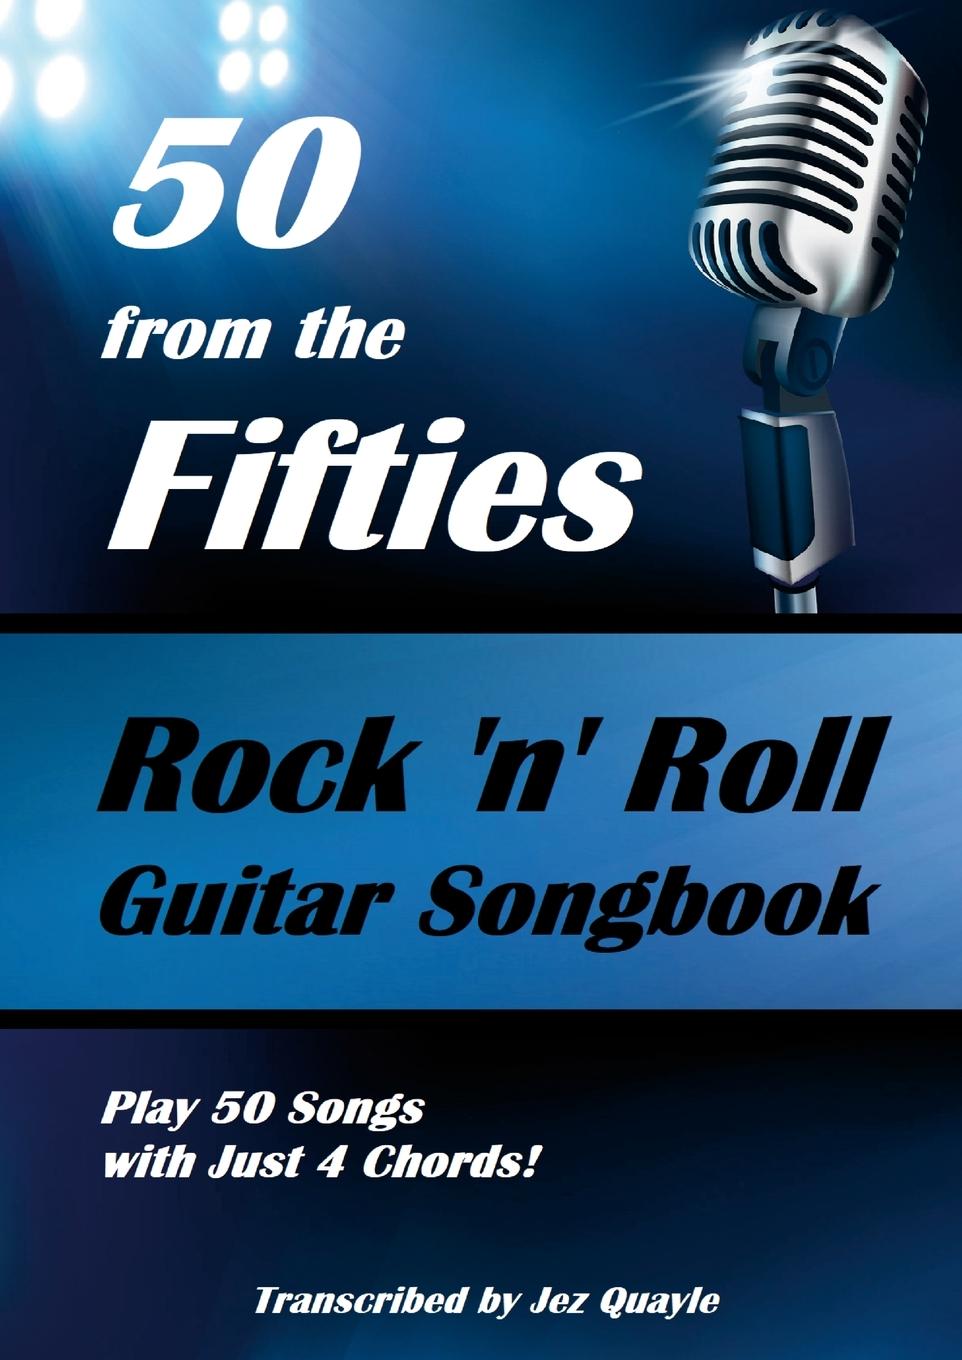 Book 50 from the Fifties - Rock 'n' Roll Guitar Songbook Jez Quayle